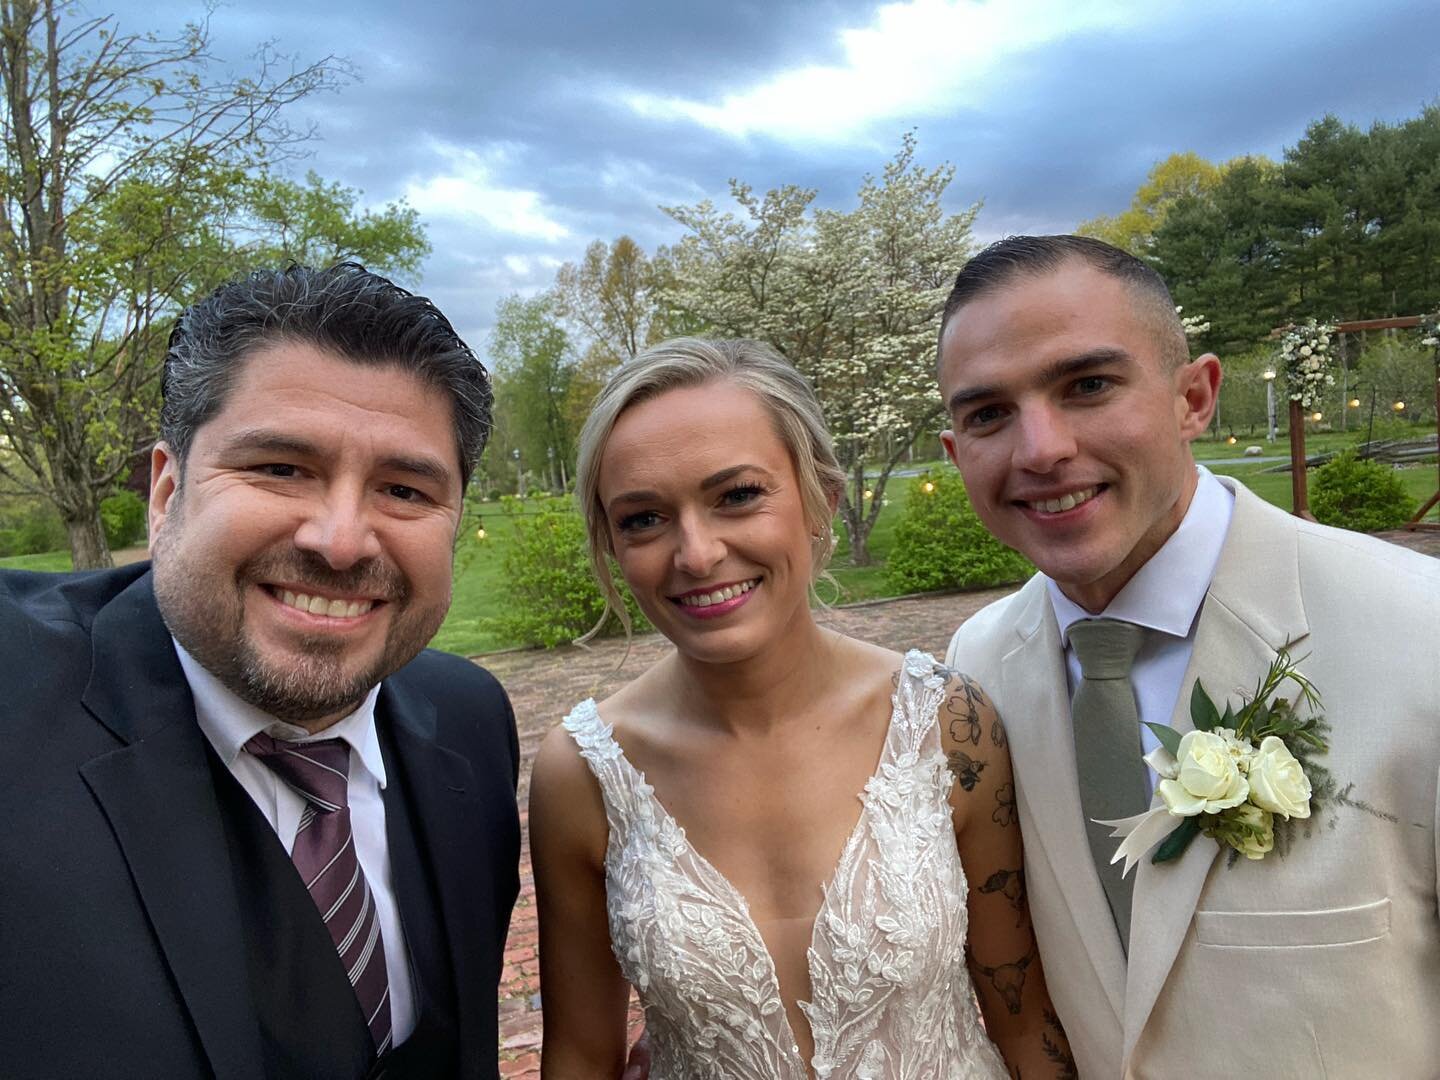 Congratulations Faith and James!  We wish you a happily ever after.  #happywedding #newlyweds💍 #weddingvibes @waterloovillageweddings #elegancetraditionfun @@steveguillenproductions